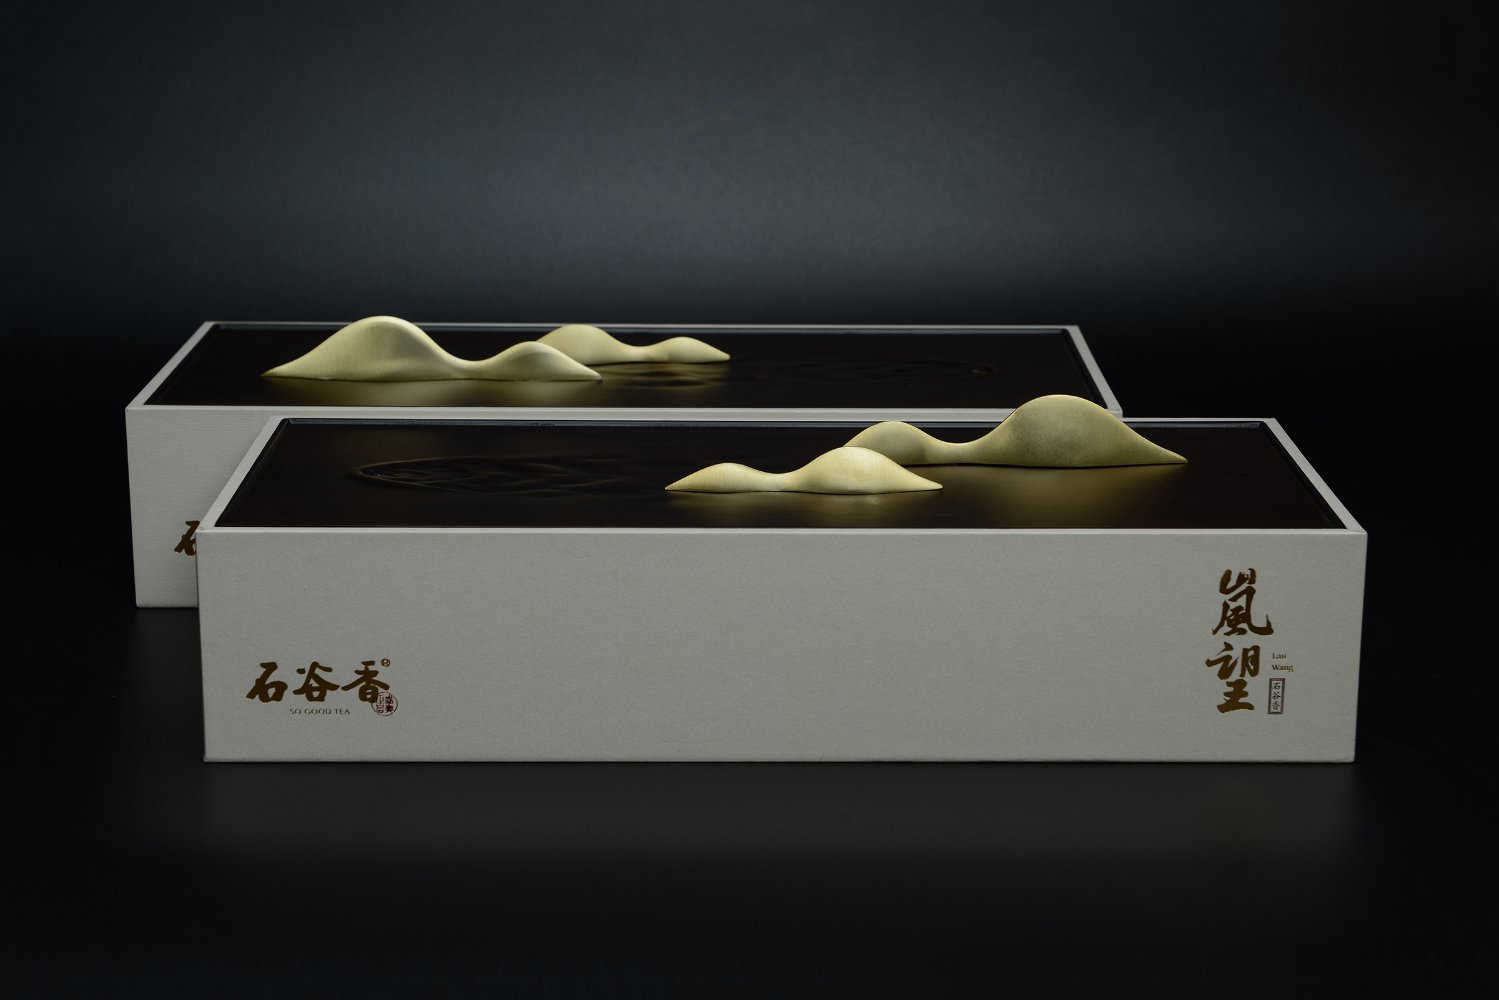 Lanwang Tea Packaging Brings Texture And Can Be Used As An Incense